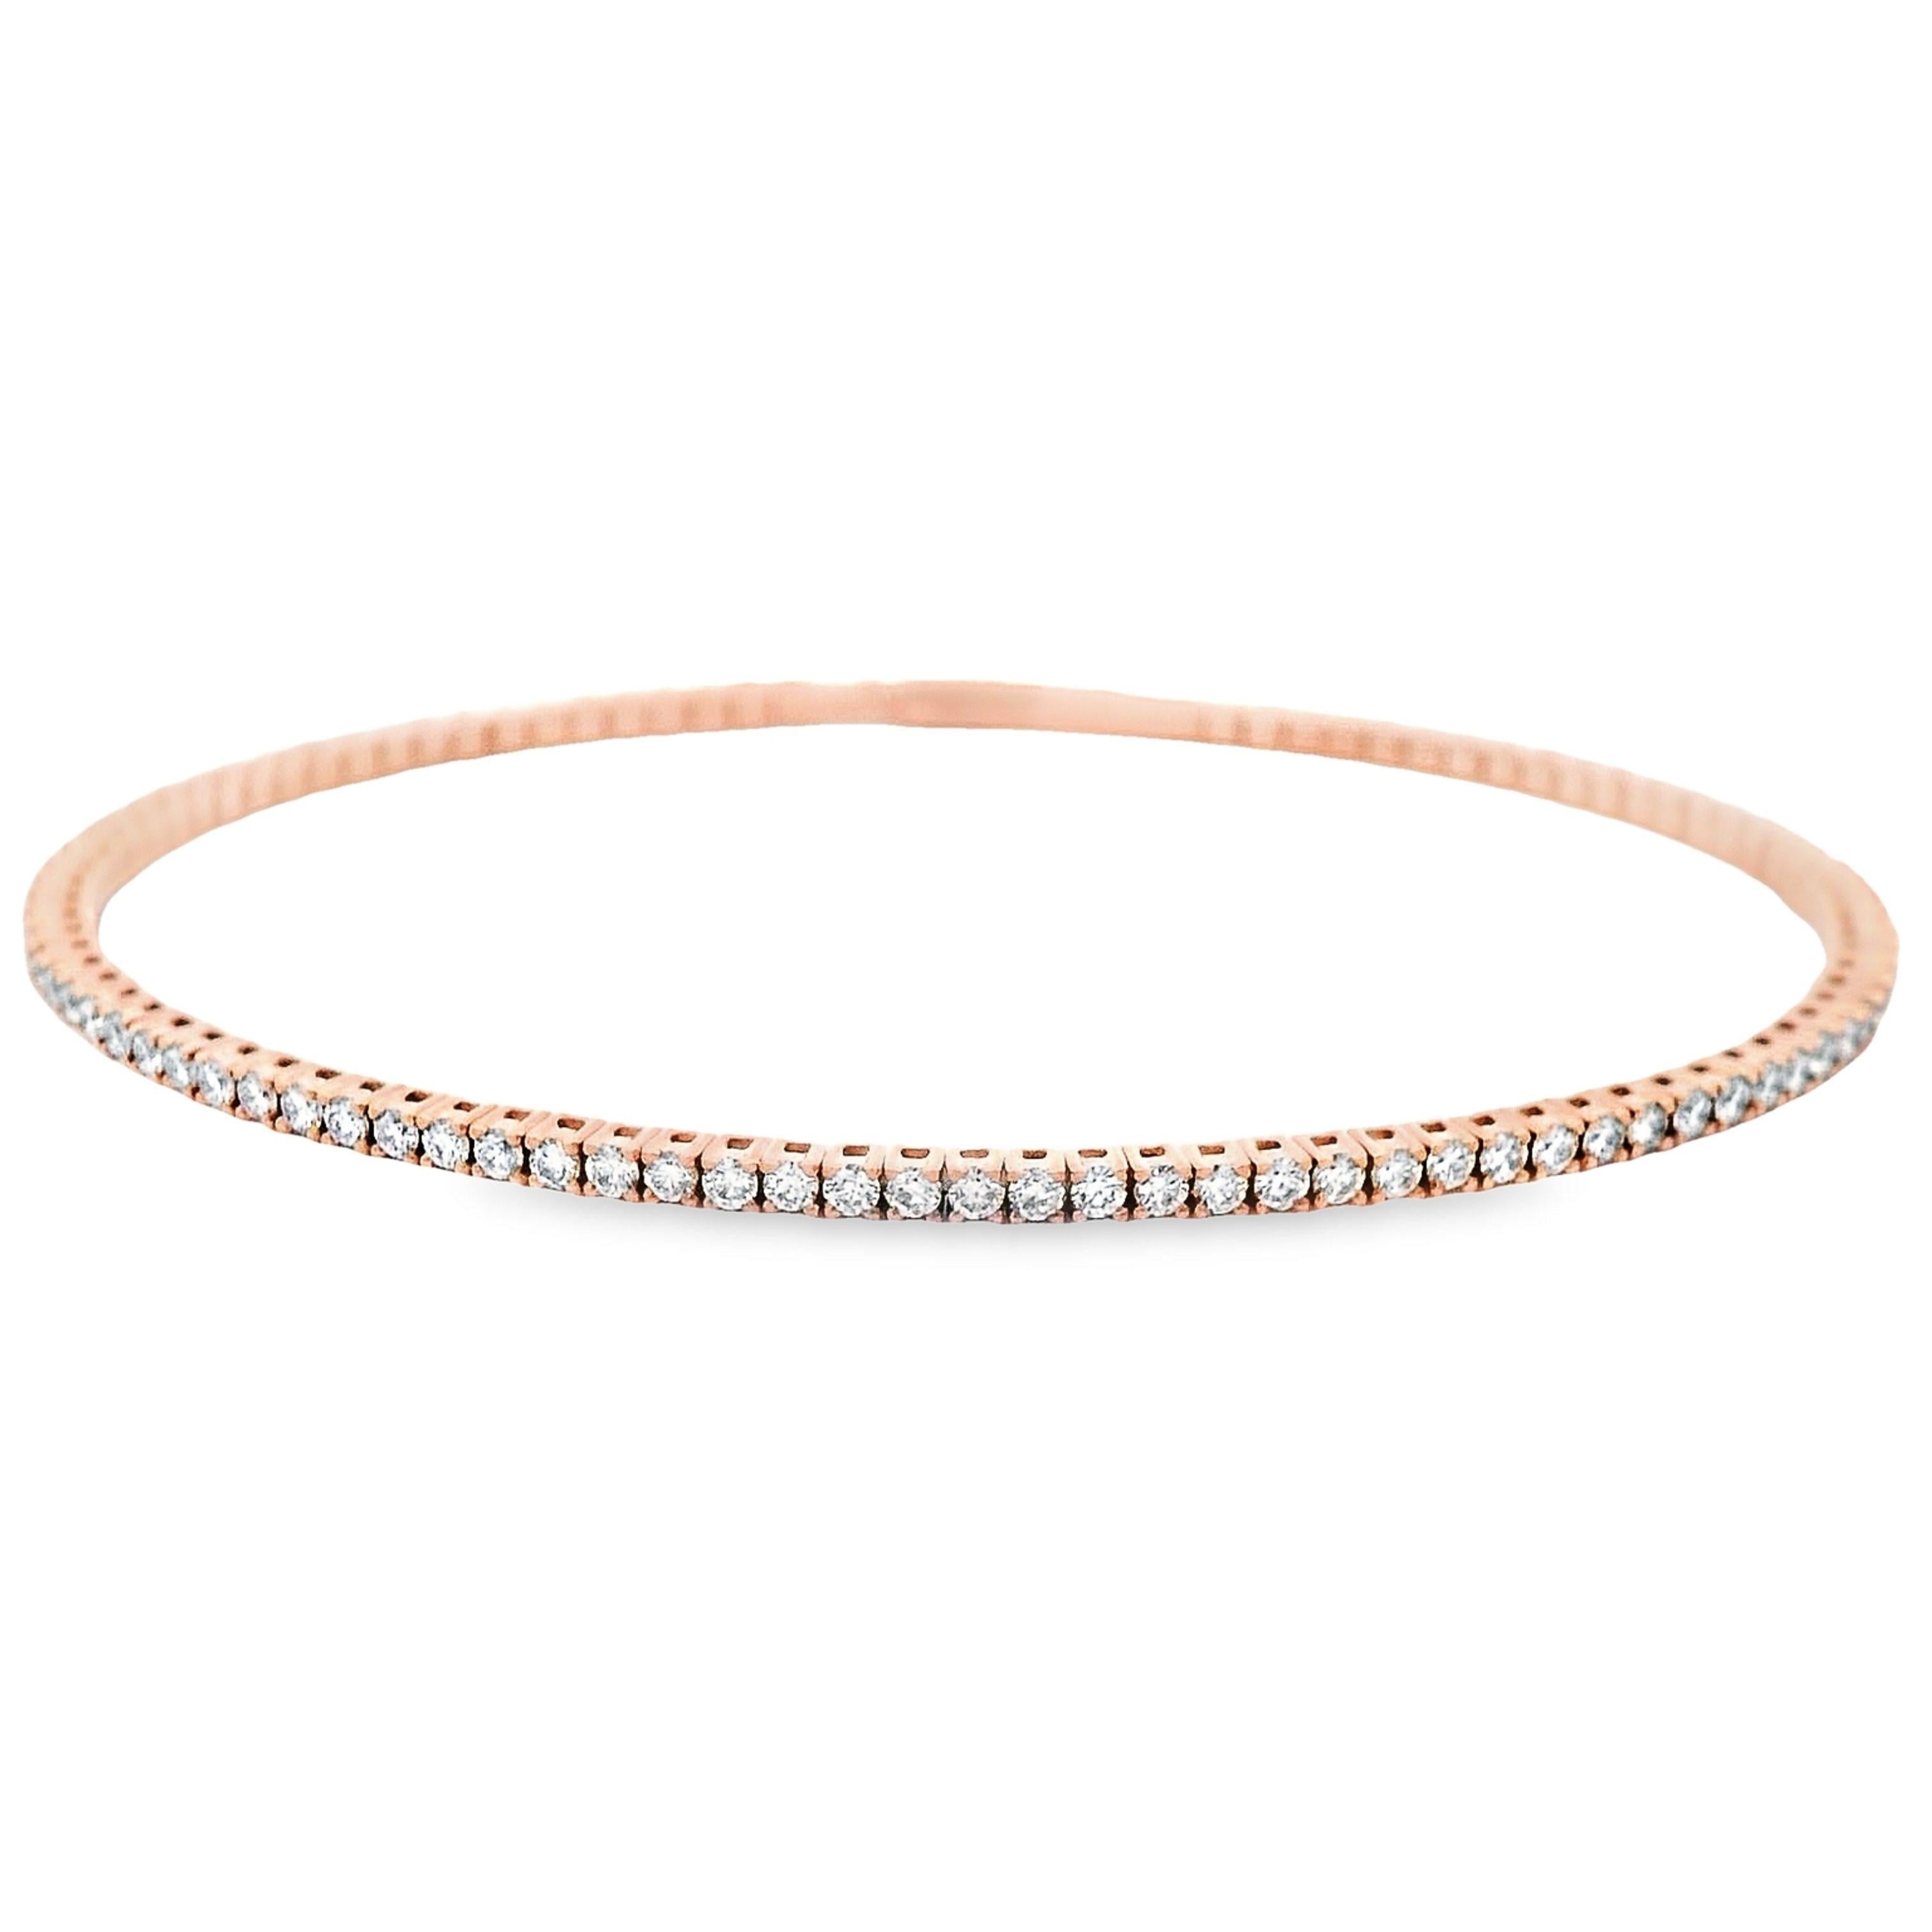 Exquisite modern diamond tennis bangle, by Alexander Beverly Hills.
71 round diamonds, 1.87 carats. Approximately E/F color and SI clarity. 14-karat rose gold, 7.24 grams, 6.5in.
Accommodated with an up-to-date digital appraisal by a GIA G.G. once